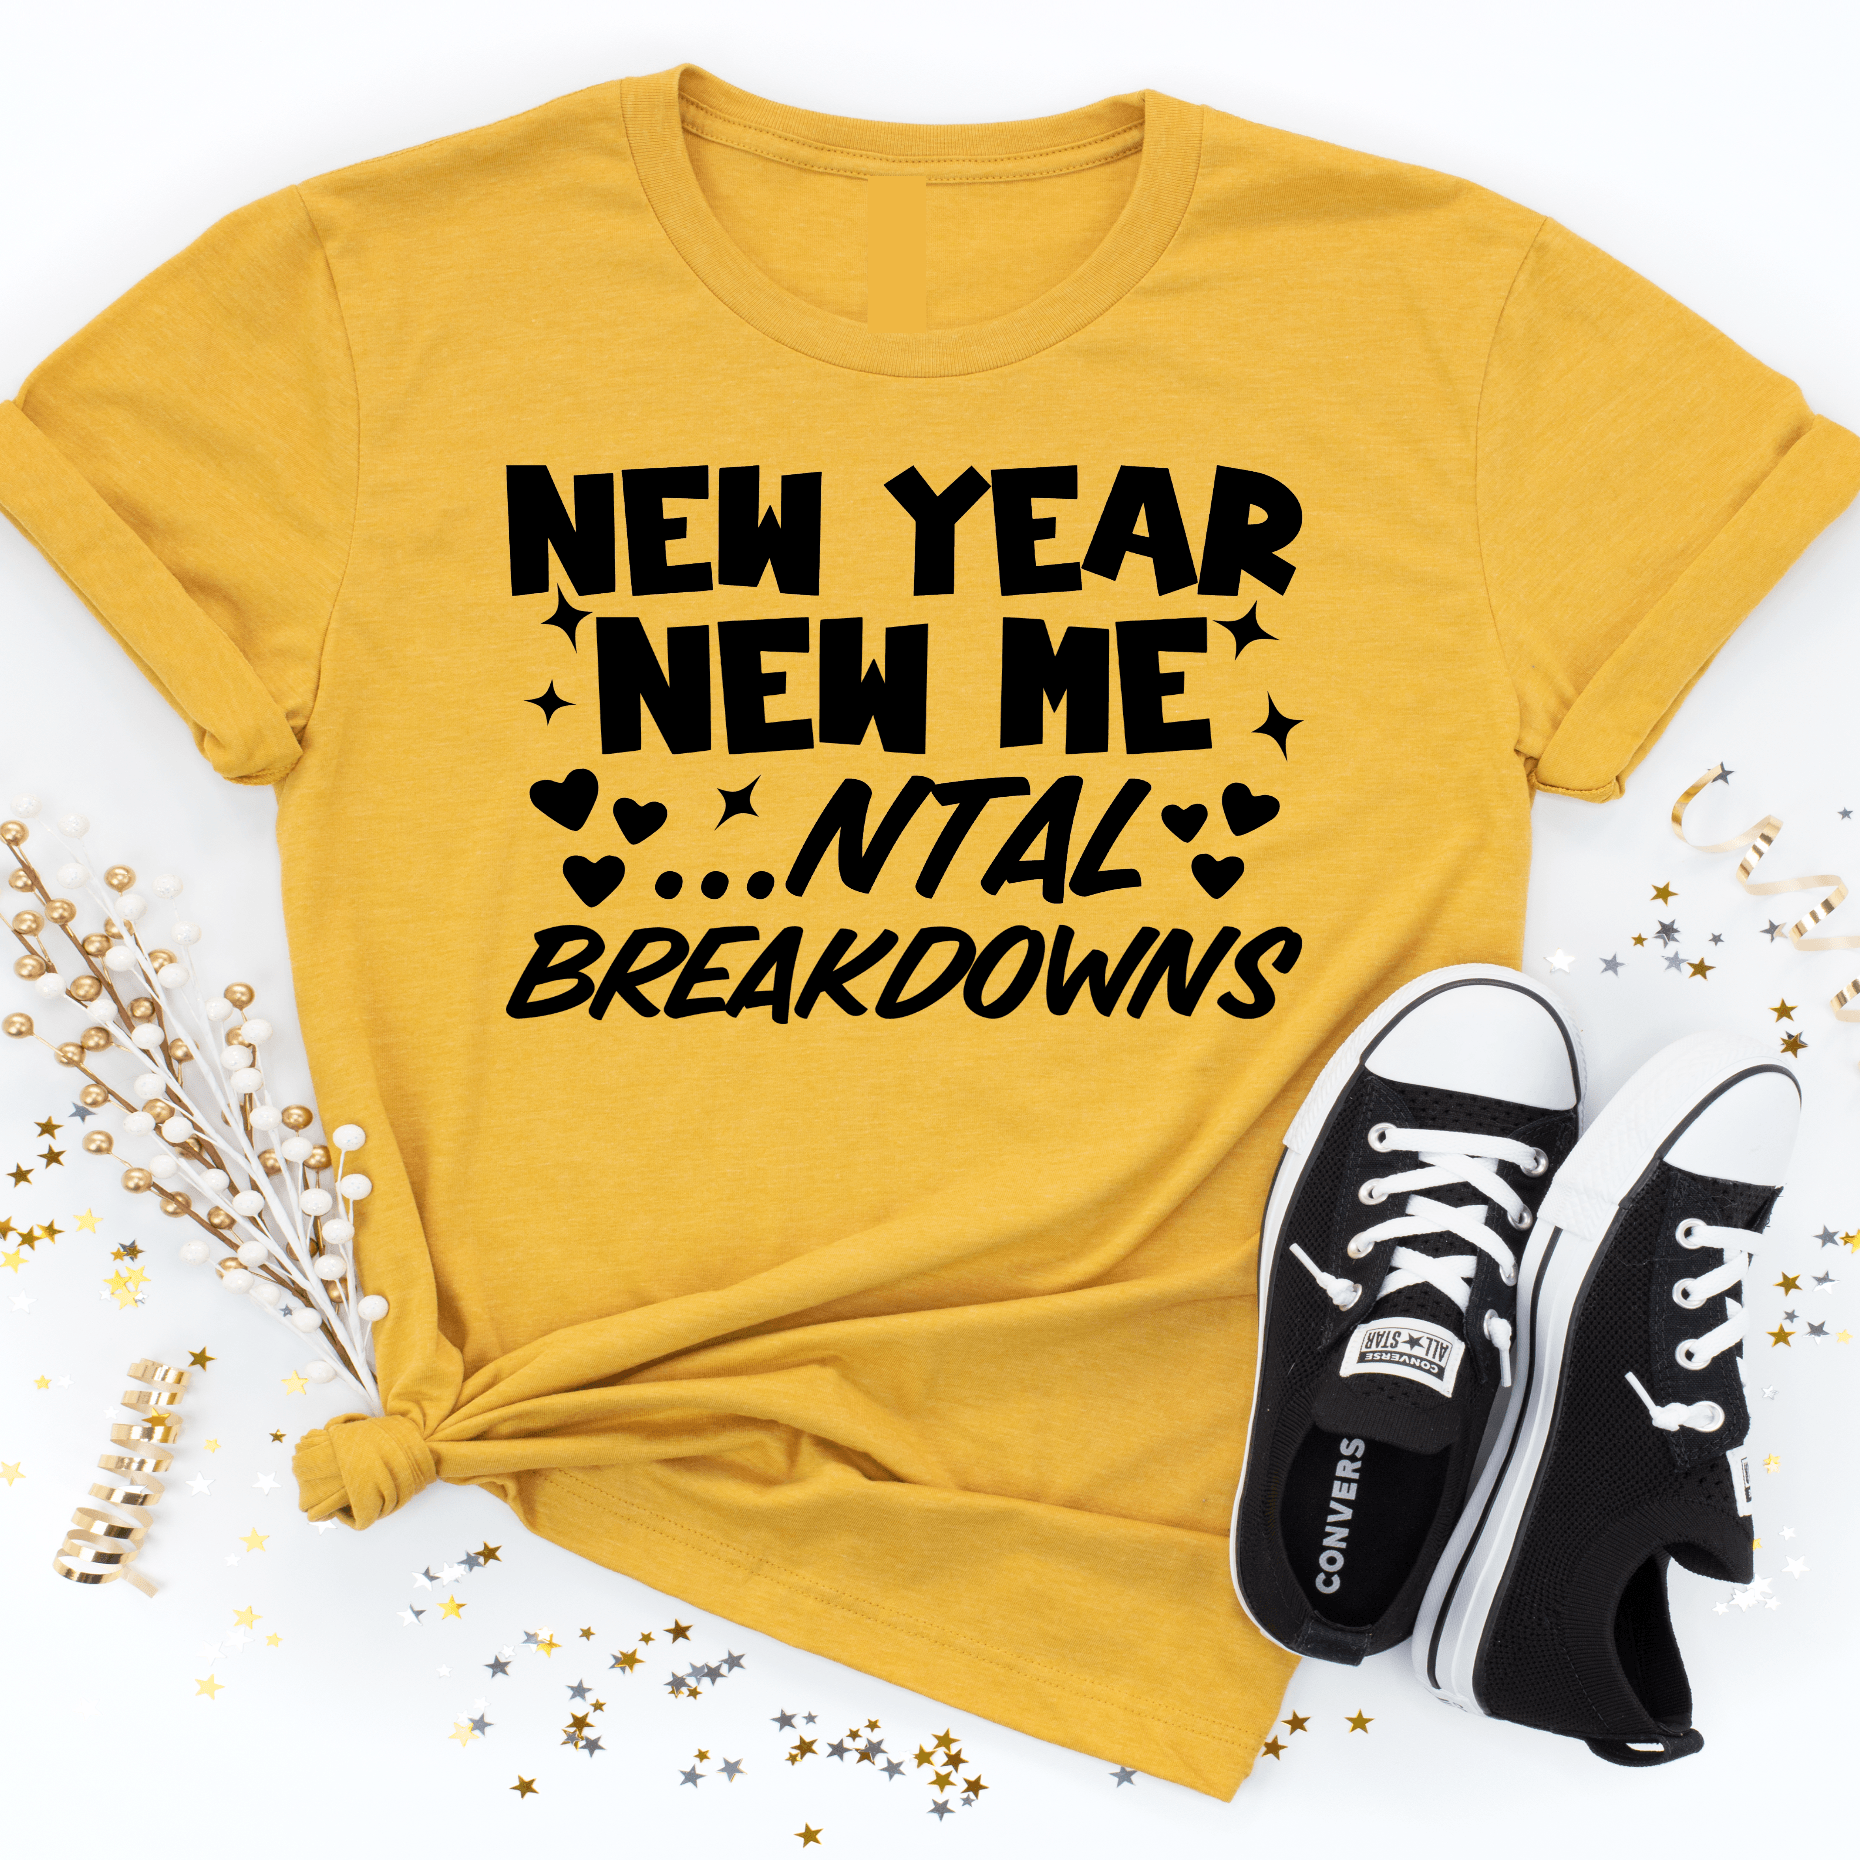 New year New me Mental Breakdowns (Pre-sale) - Signastyle Boutique